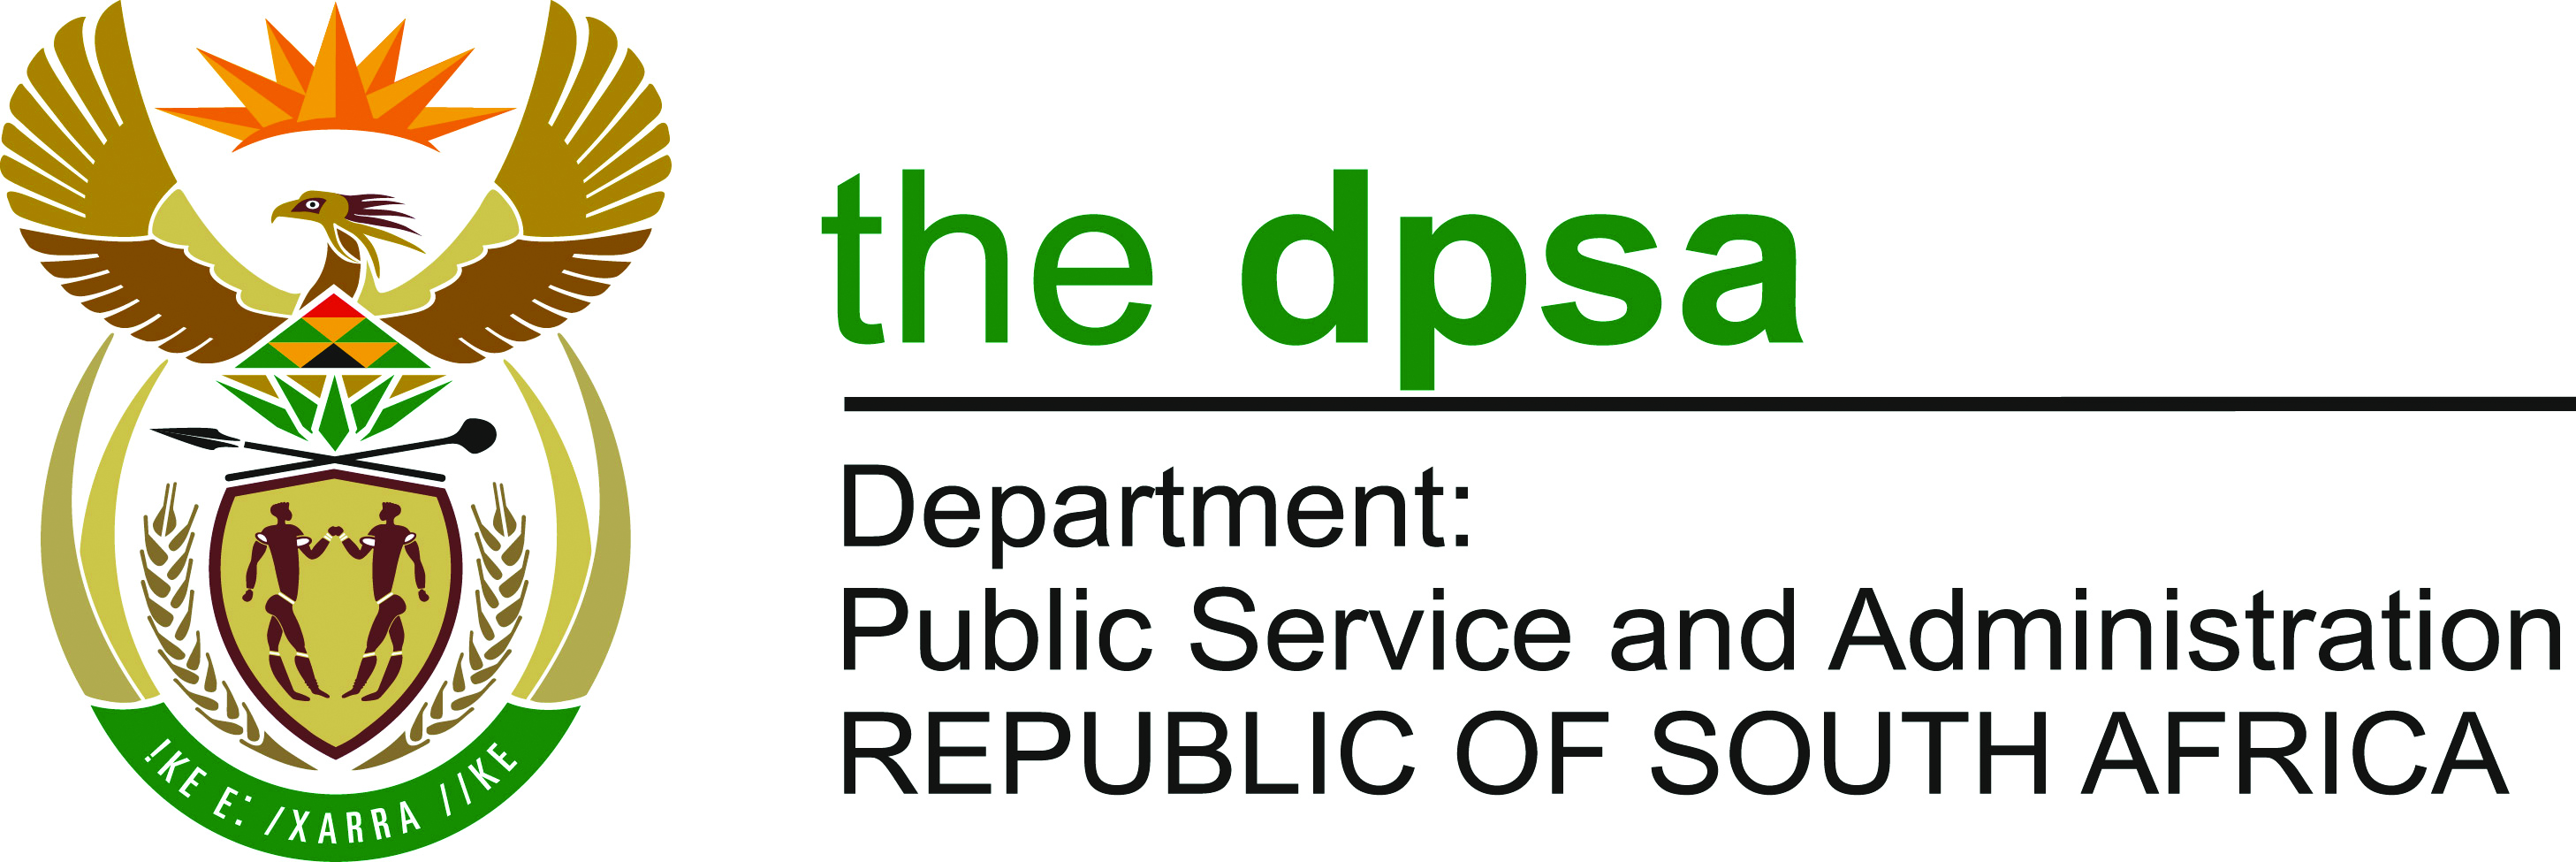 Department of Public Service and Administration